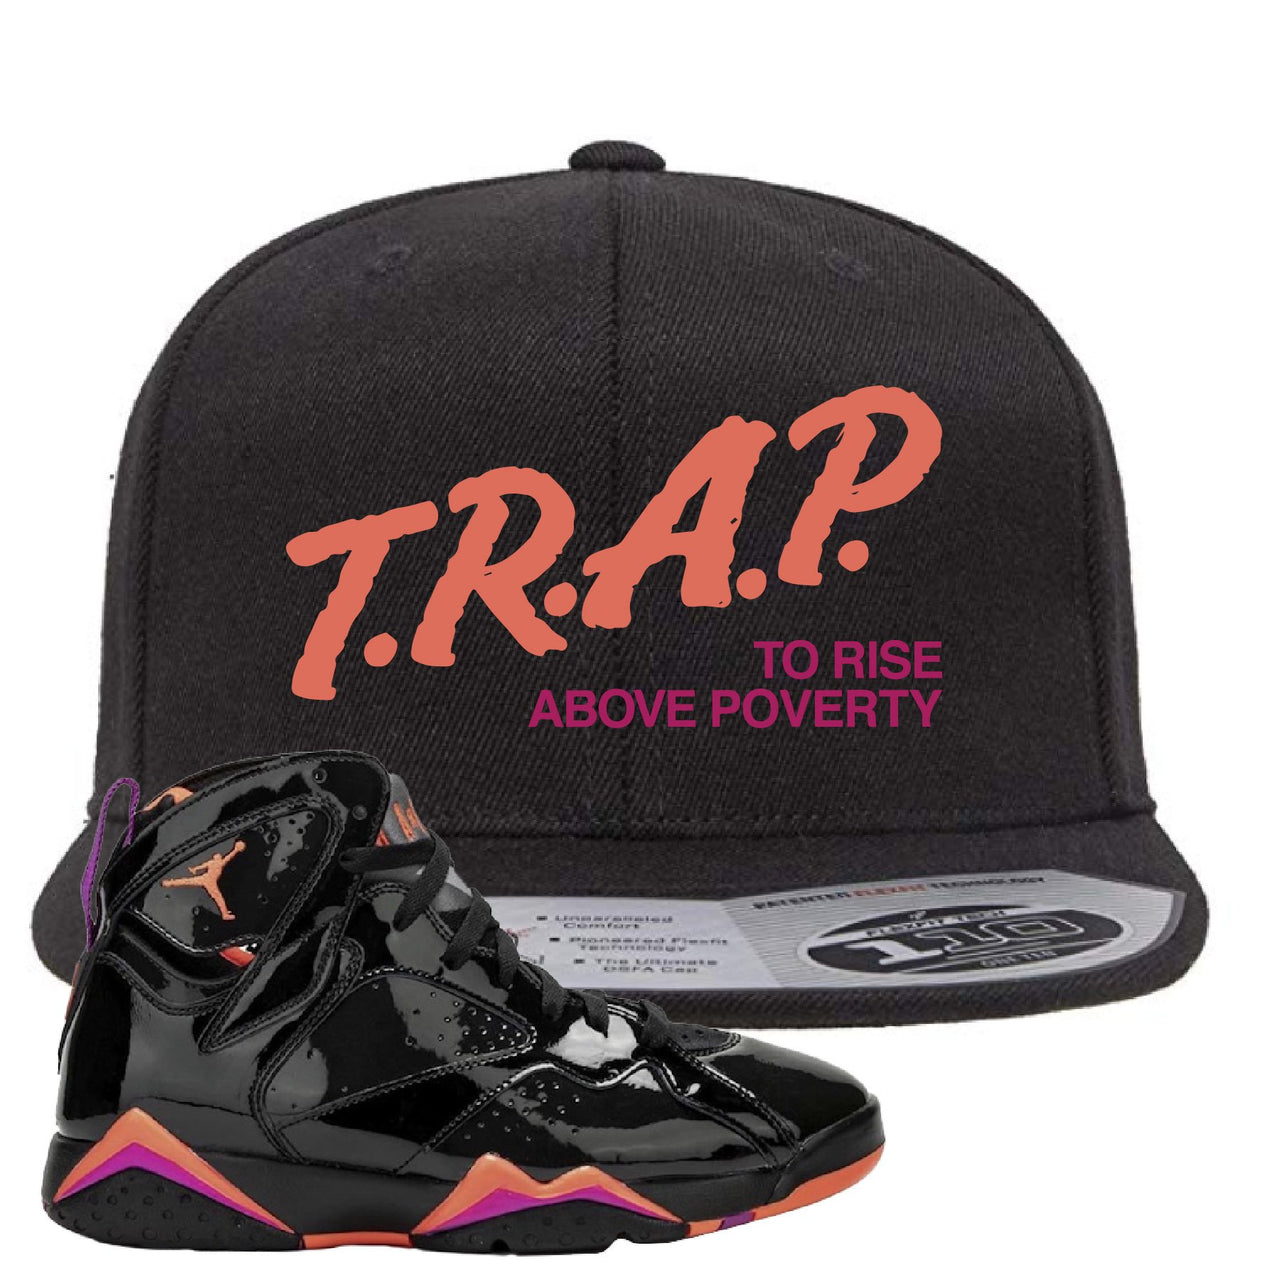 Jordan 7 WMNS Black Patent Leather Trap To Rise Above Poverty Black Sneaker Hook Up Snapback Hat